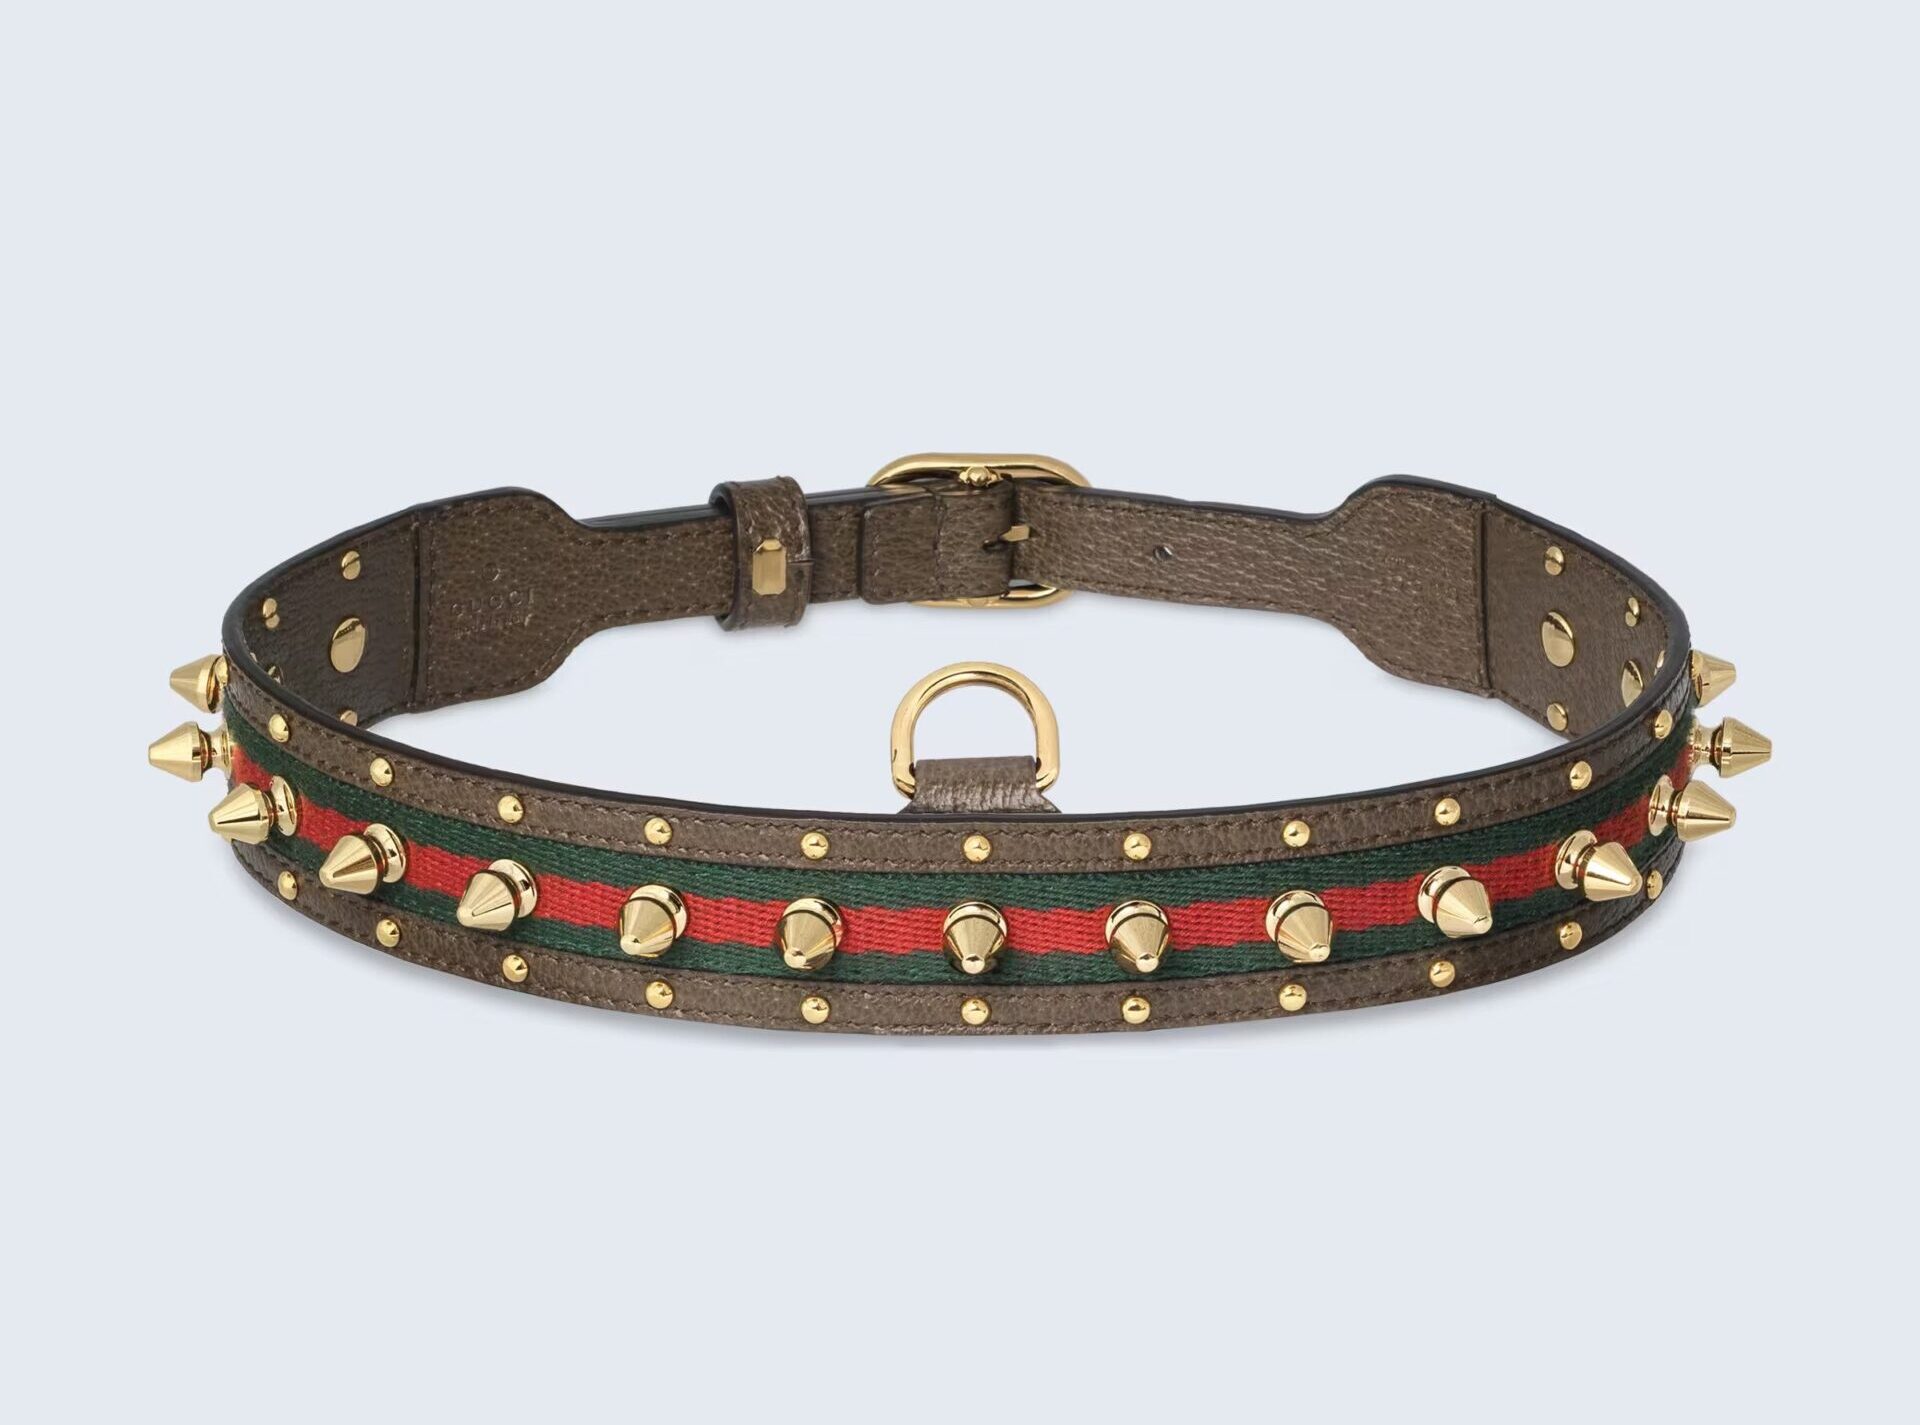 Chic designer dog collars to shop for your pup: GUCCI Pet Choker